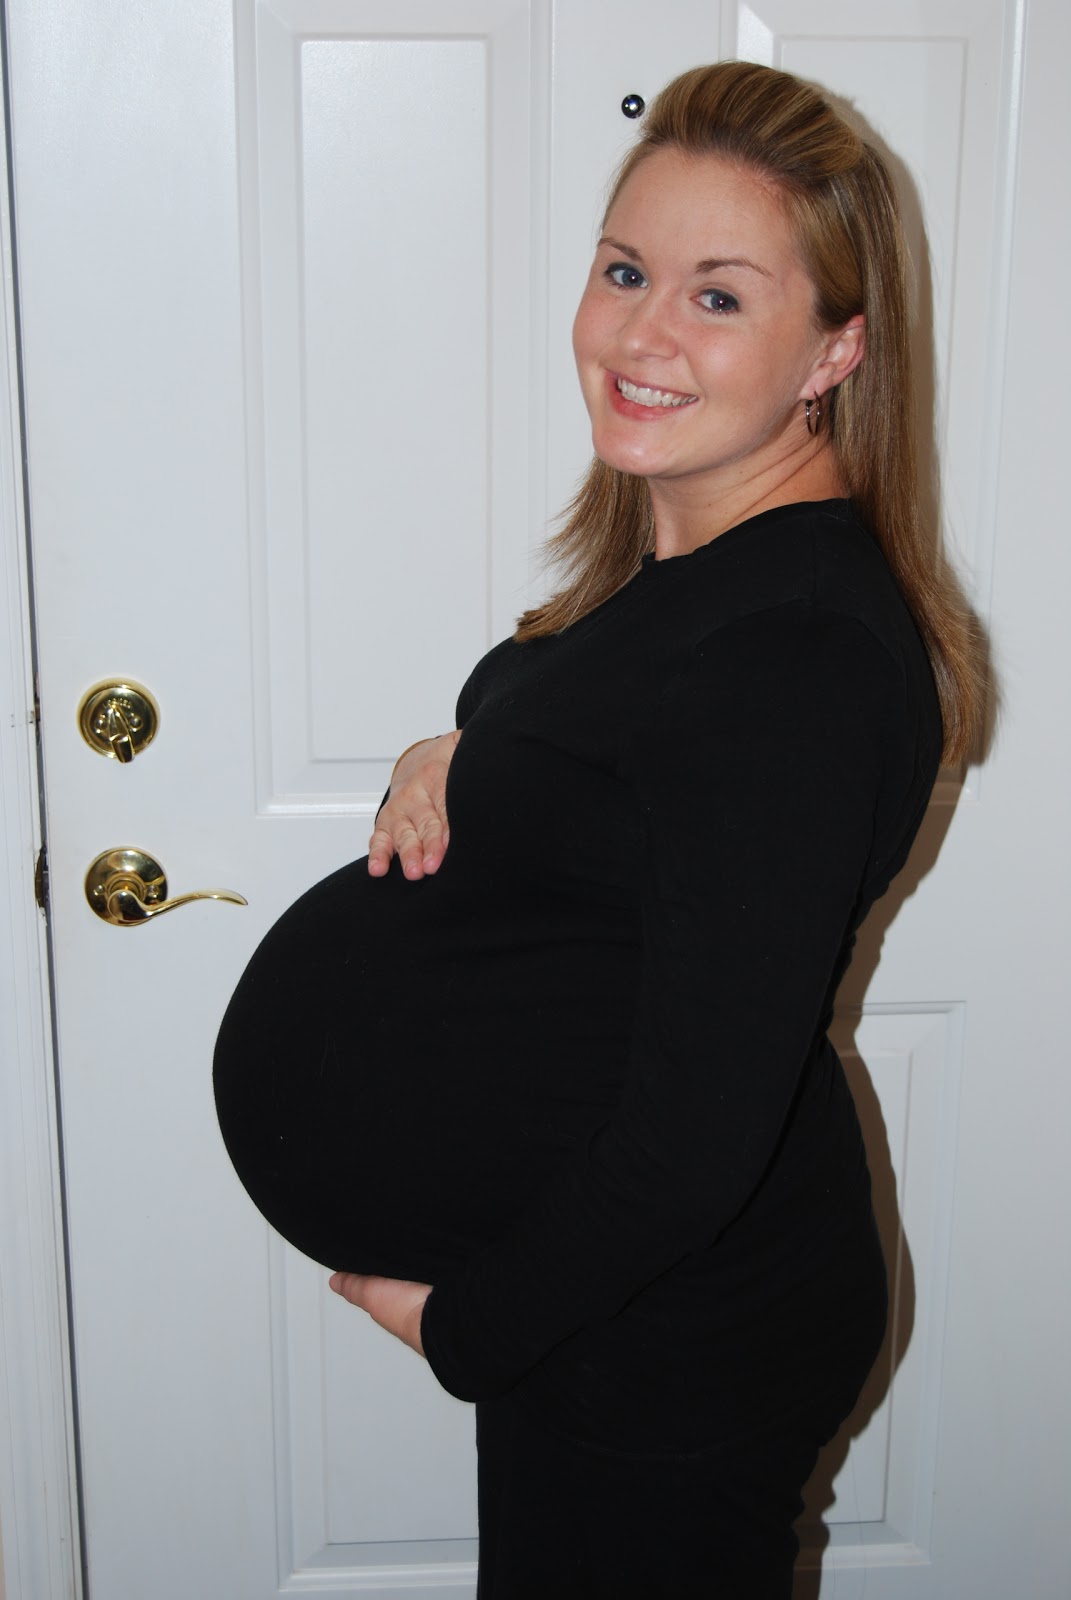 The Life of a Fireman's Wife: 37 Weeks - Full Term!!!